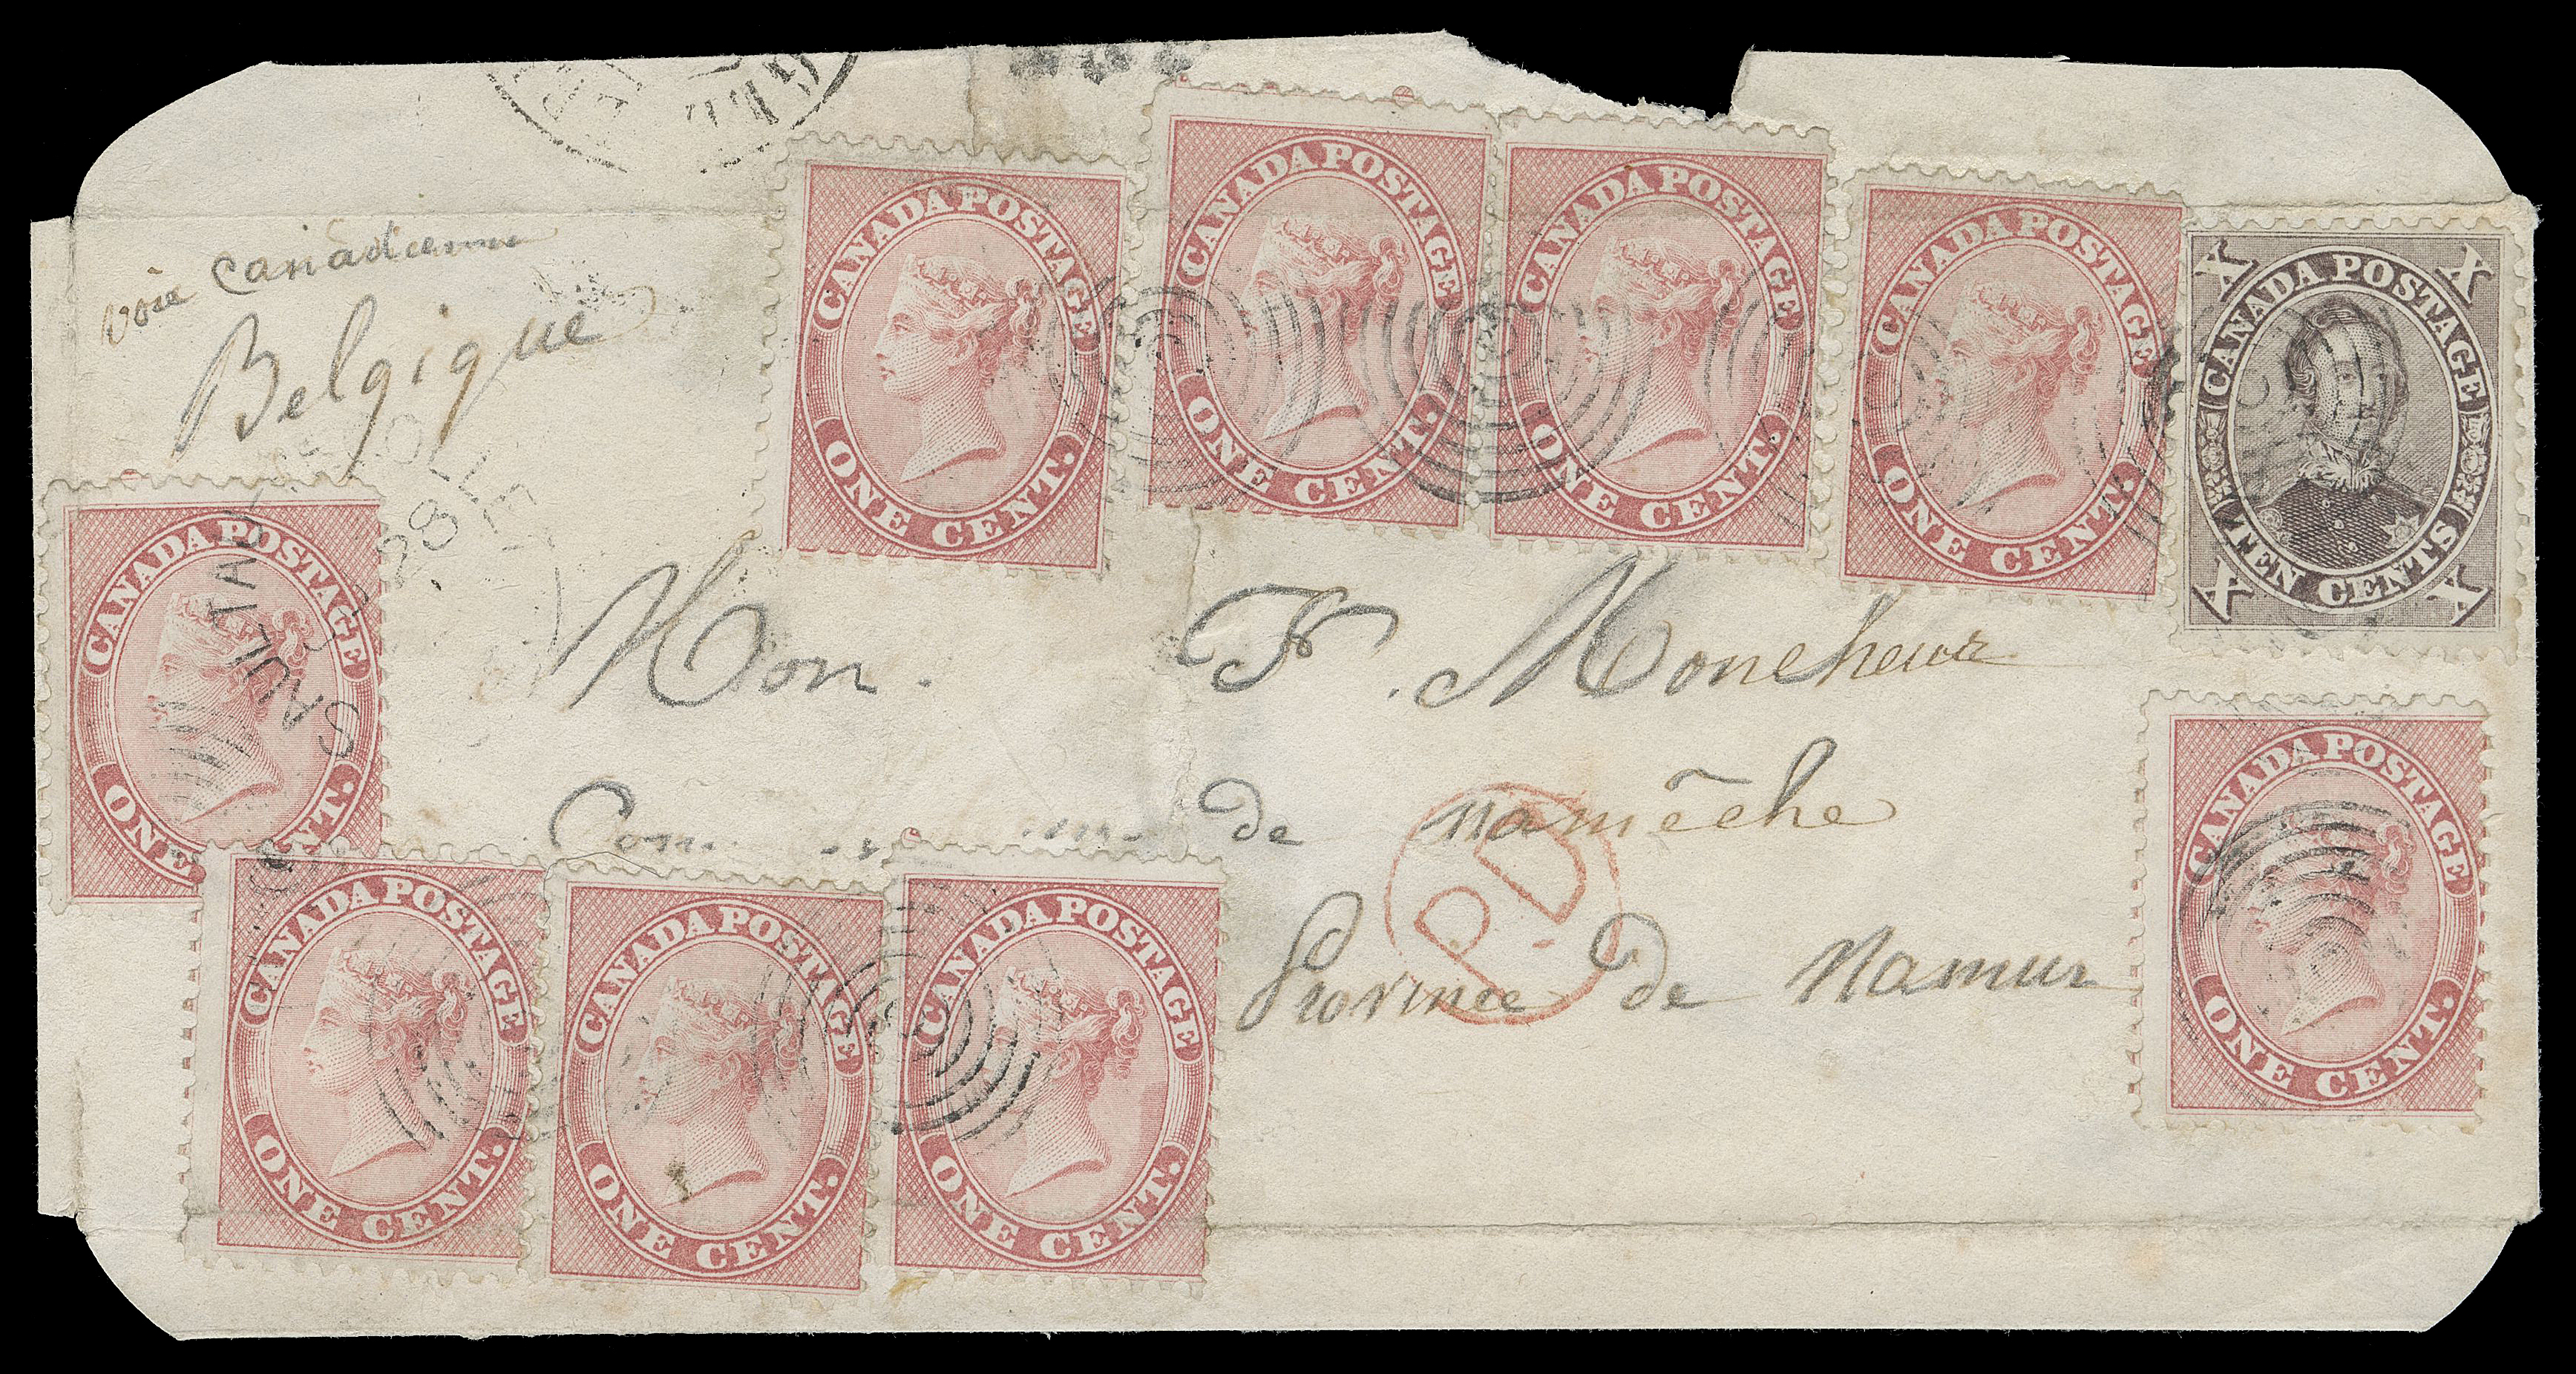 HALF PENNY AND ONE CENT  1864 (June 28) Envelope from Sault Au-Récollet to Namêche, Belgium, bearing an unusual franking of a 10c brown and nine 1c rose, perf 12x11¾, nearly all affected from overlapping envelope; subsequently refolded to show the complete franking. Tied by light concentric rings cancels, stamp at left further tied by light split ring dispatch, circular "PD" instructional marking in red, blurry Montreal JU 28 transit and two different Belgian backstamps JUIL 15 and JUIL 16. Pays a remarkable 19 cent rate via Canadian Packet to Belgium. Despite the flaws an extraordinary franking of the utmost rarity, Fine appearing and extremely rare. (Unitrade 14viii, 17b)

Provenance: Bill Lea Exhibit Collection of Canada Pence & Cents Postal History (private sale)
Art Leggett Cents Issue Exhibit Collection (private sale)
The "Lindemann" Collection (private treaty, circa. 1997)

Census: Firby records only two covers to Belgium, this being a UNIQUE franking.